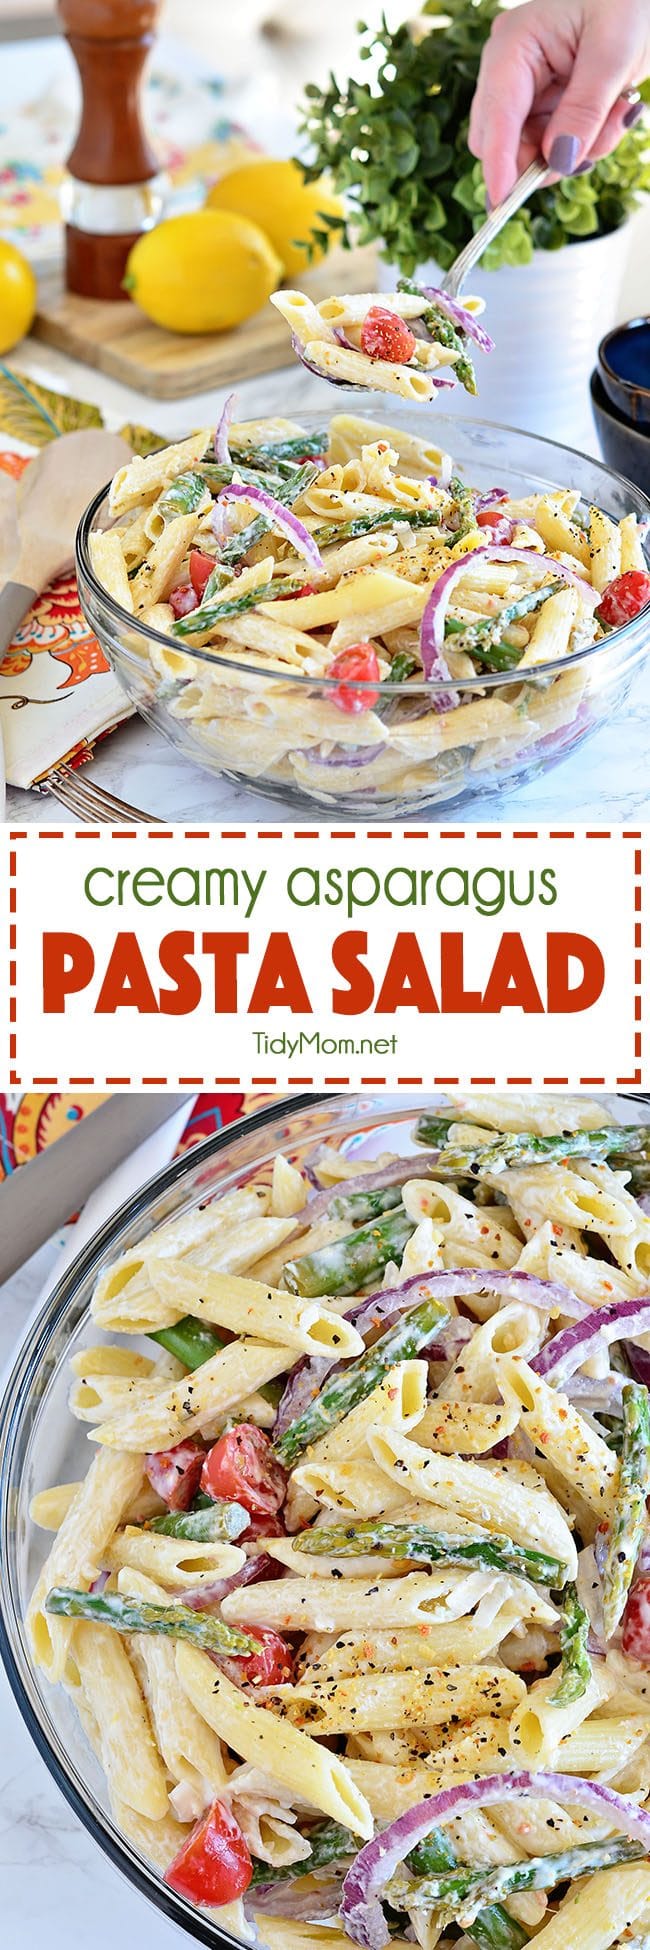 Creamy Asparagus Pasta Salad comes with an extra punch of flavor from fresh lemon juice and makes a perfect spring side dish. Add grilled chicken and it could be a meal all on it’s own. Recipe at TidyMom.net